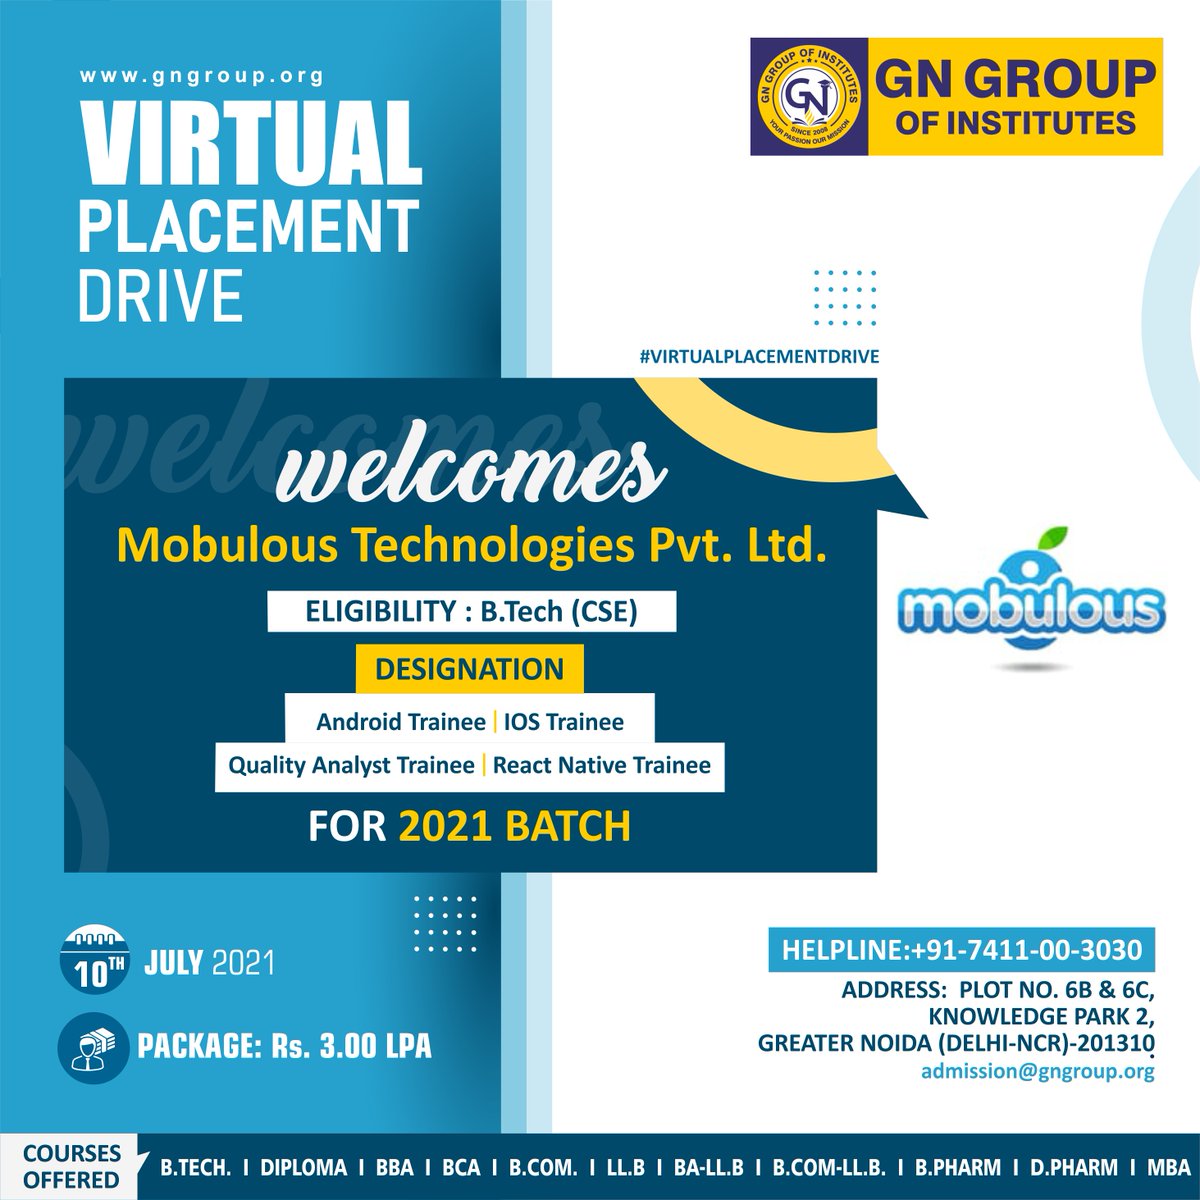 GN Group of Institutes, Greater Noida
Welcomes Mobulous Technologies Pvt. Ltd.
for Virtual Placement Drive ON 10 July 2021
GN Group of Institutes
#placement2021 #virtualplacementdrive #career #education #bestcollegeingreaternoida #topcollegeindelhincr #collegeingreaternoida